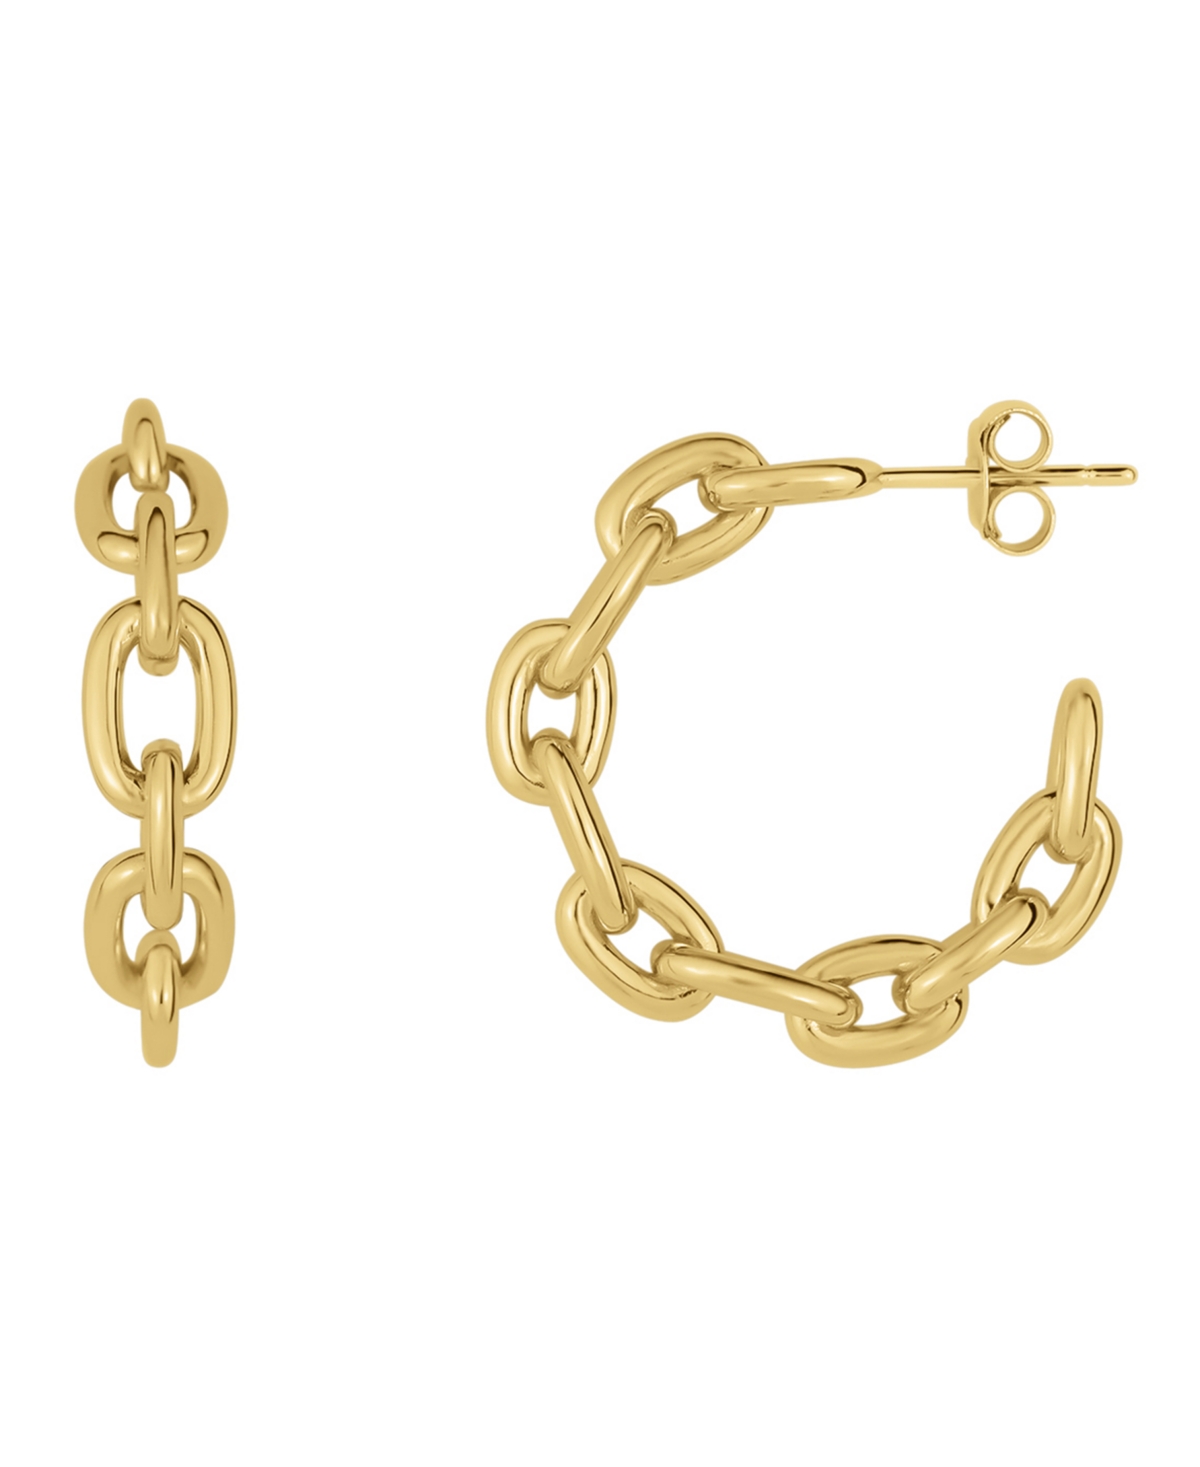 And Now This 18k Gold Plated Hoop Earring In K Gold Plated Over Brass